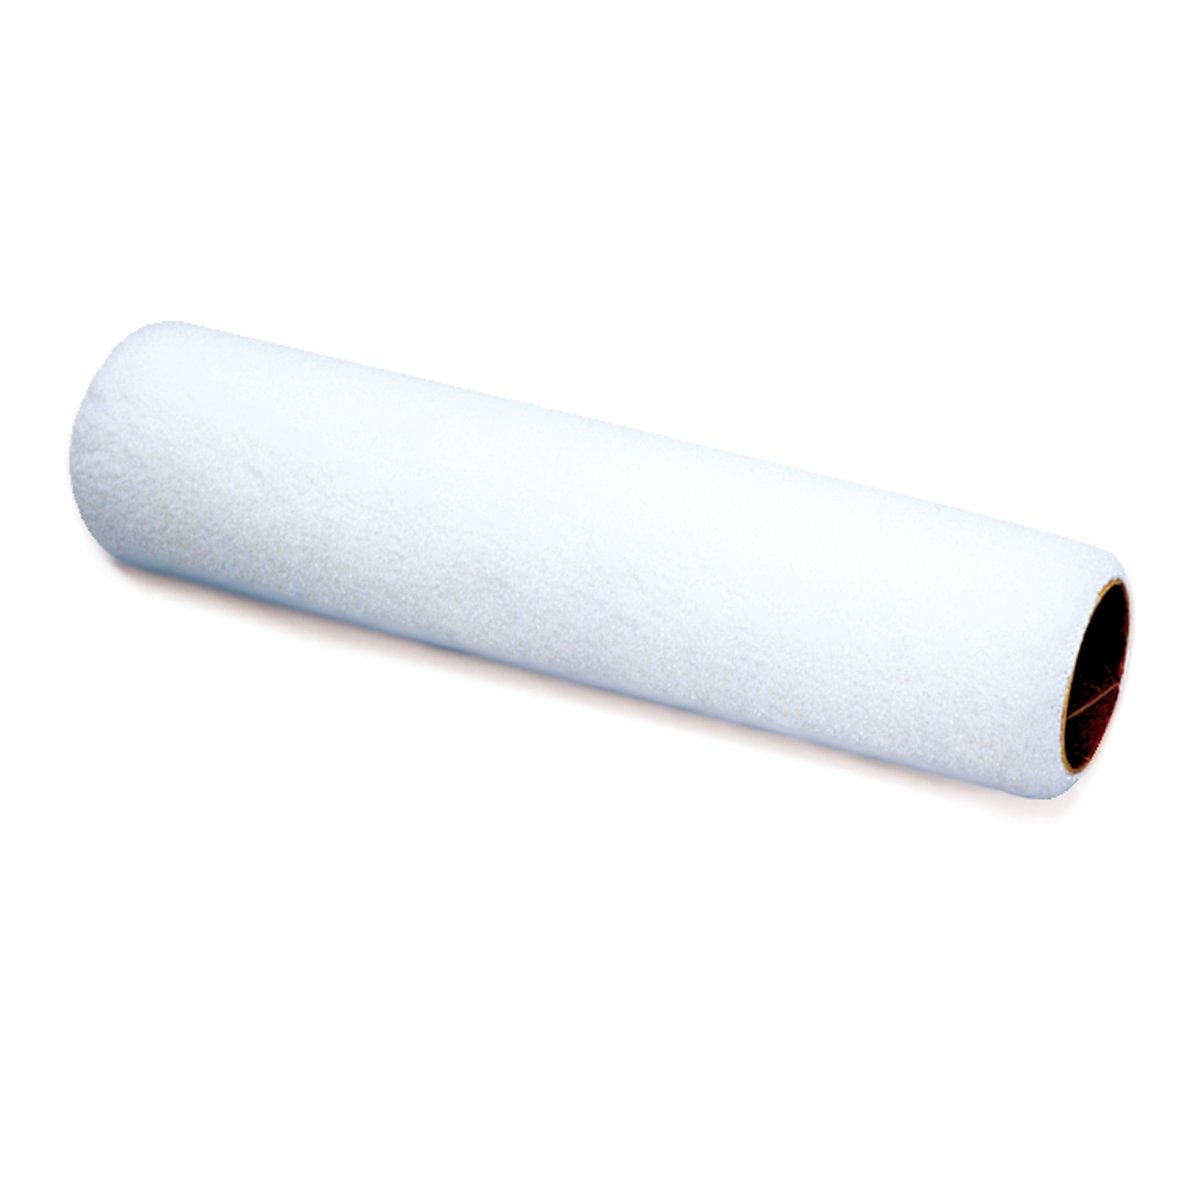 Picture of Redtree Industries 3006.1092 29114 Multi Purpose Paint Roller Cover - 9 in.